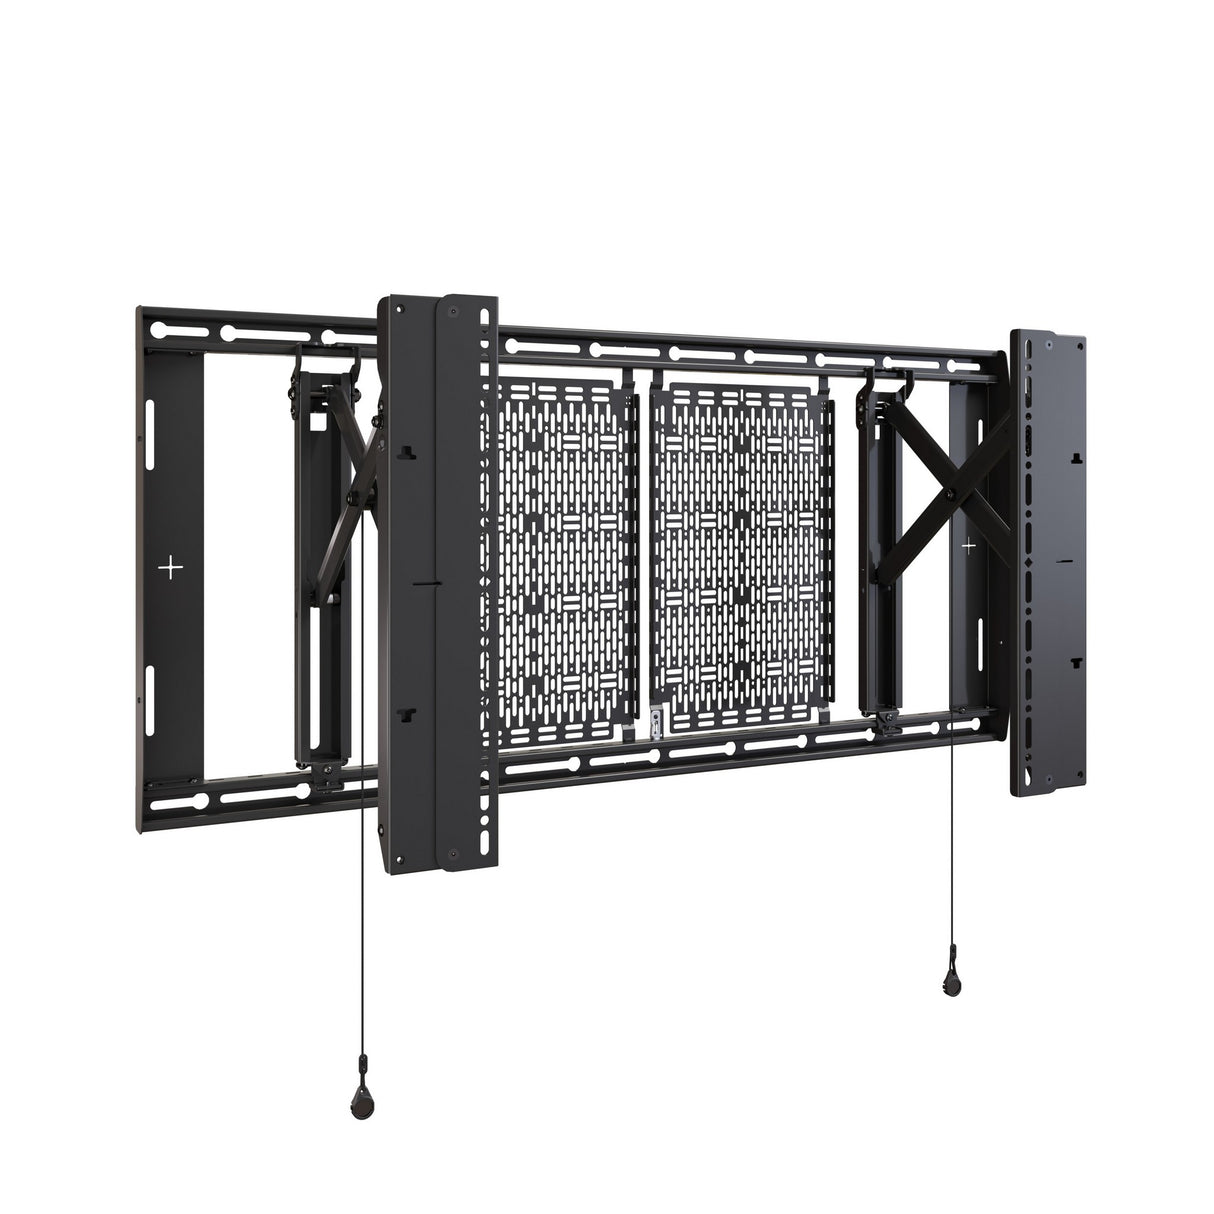 Chief AS3LD Tempo Flat Panel Wall Mount System for 49-86-Inch Displays PDU Bundle